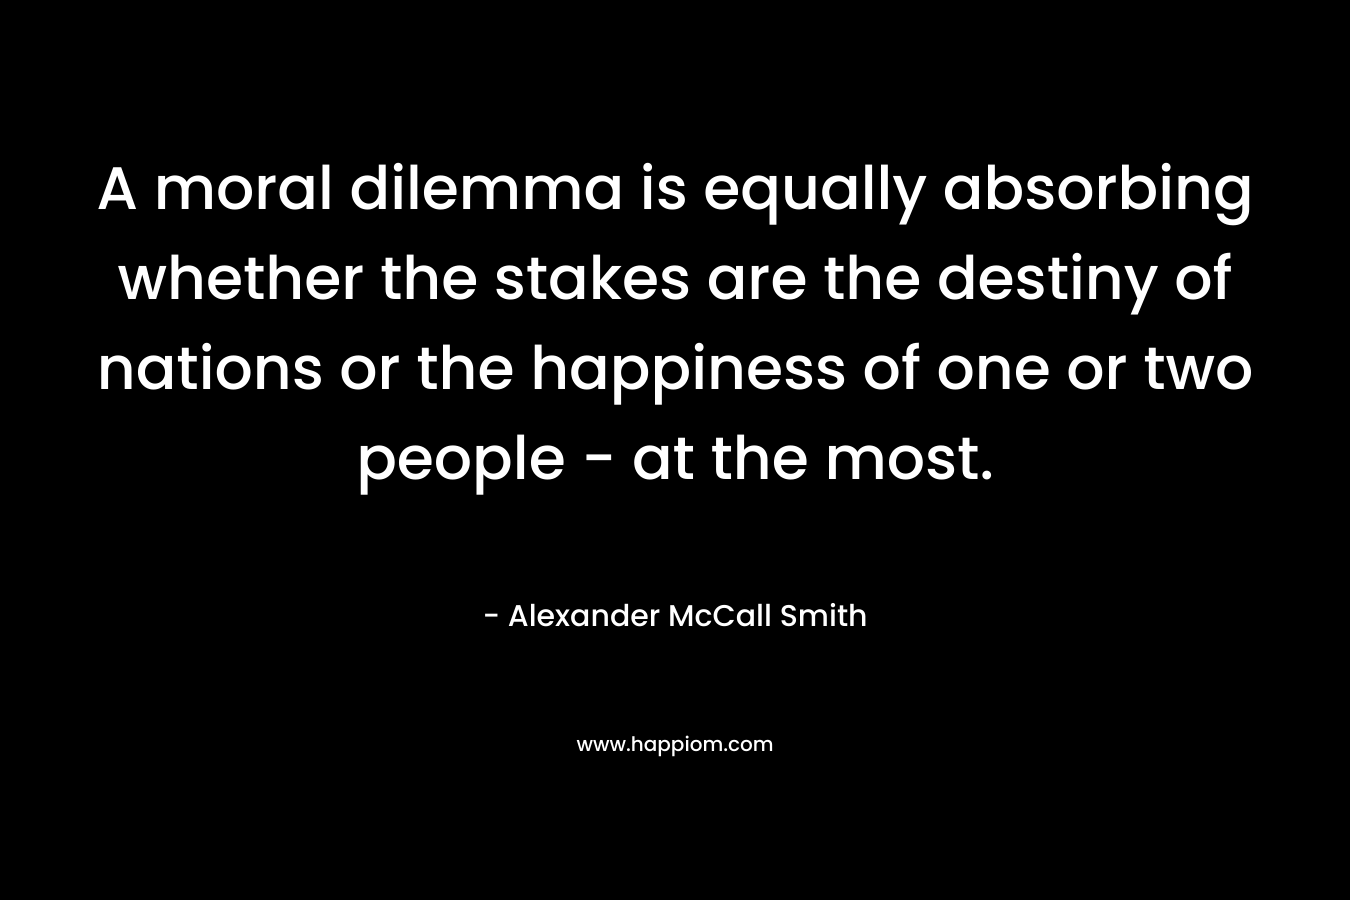 A moral dilemma is equally absorbing whether the stakes are the destiny of nations or the happiness of one or two people - at the most.